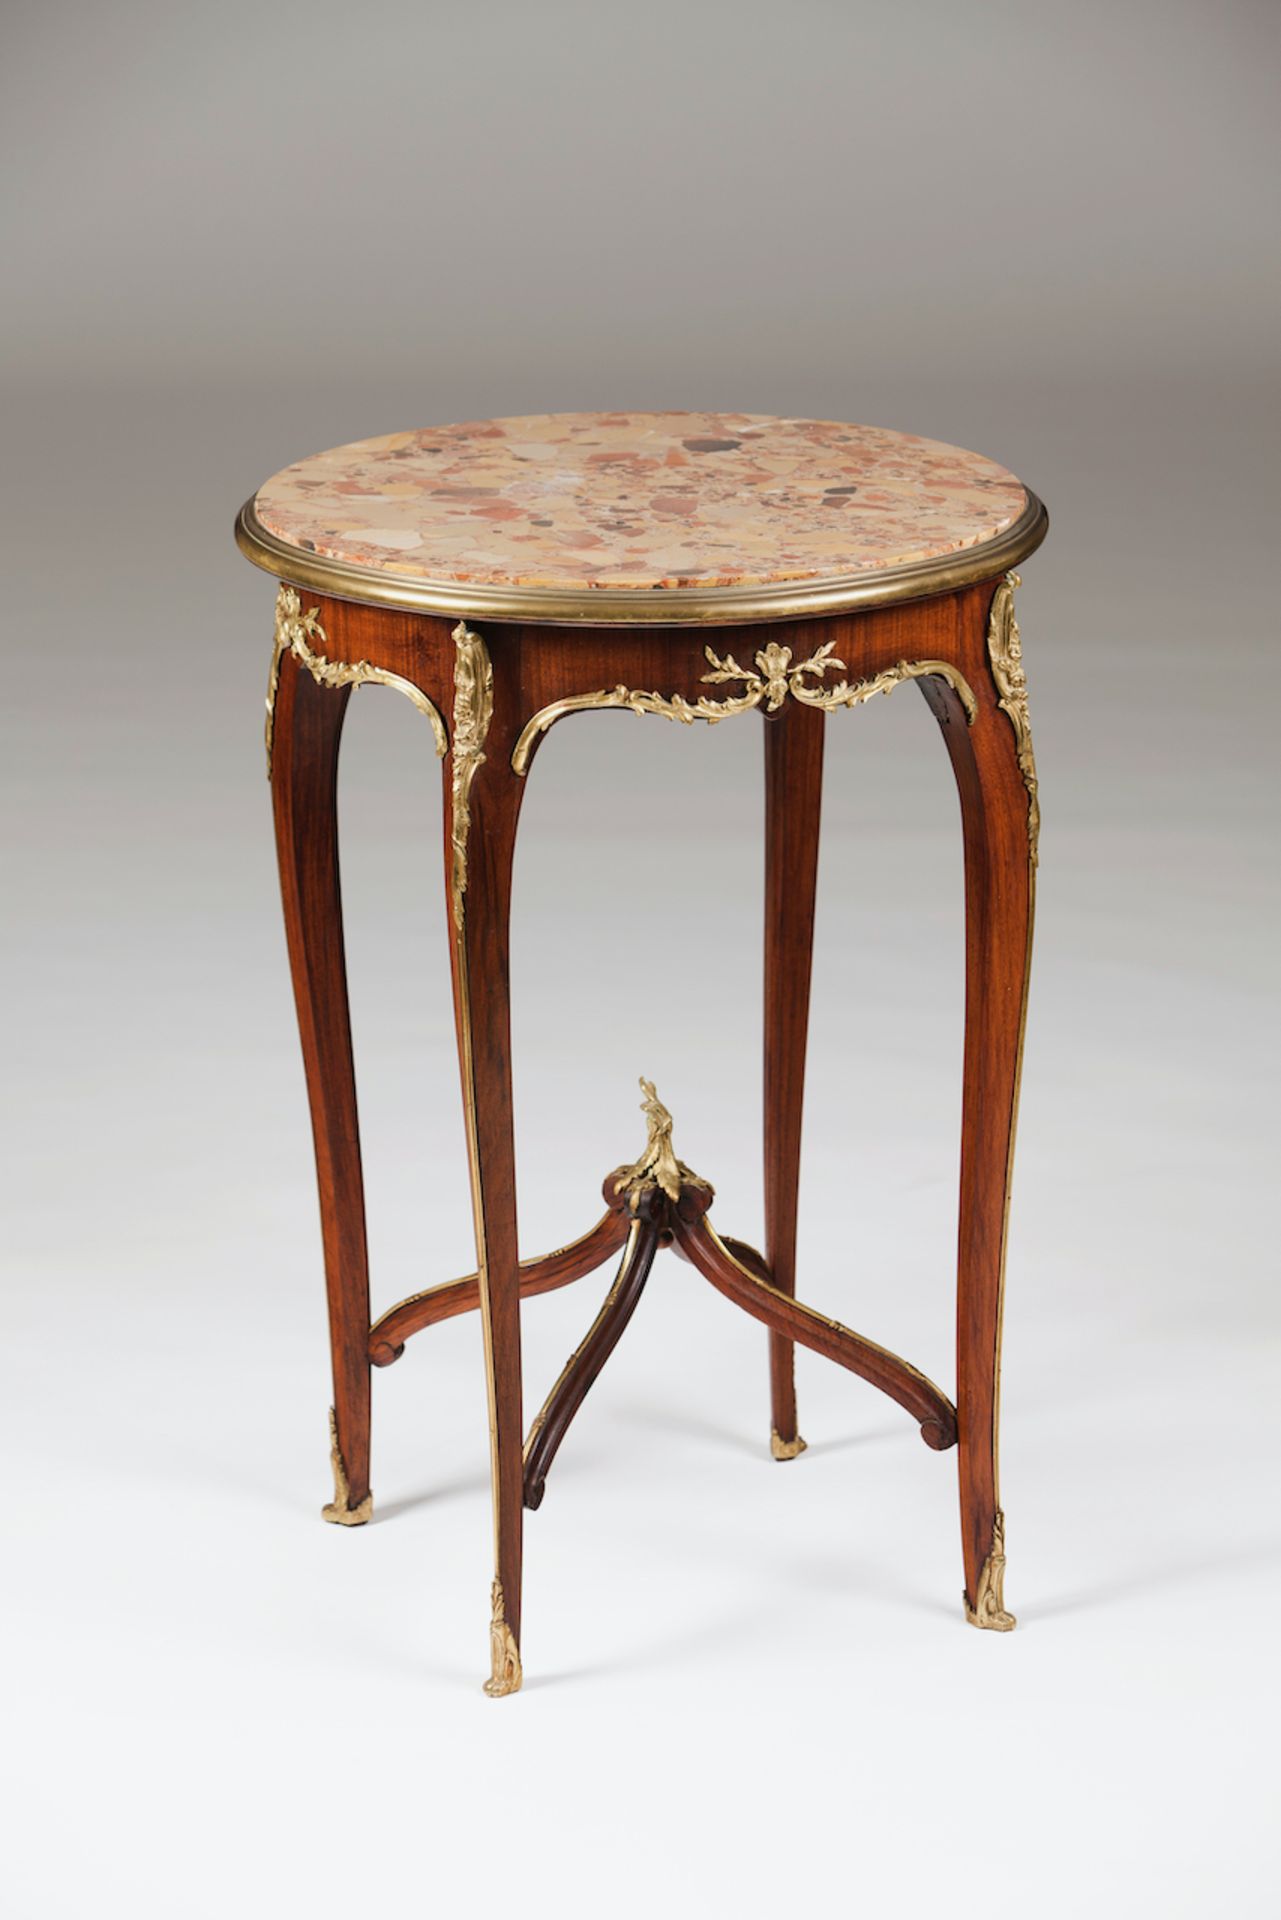 A Louis XV style gueridonSolid and veneered mahoganyYellow metal applied elementsBreccia top19th